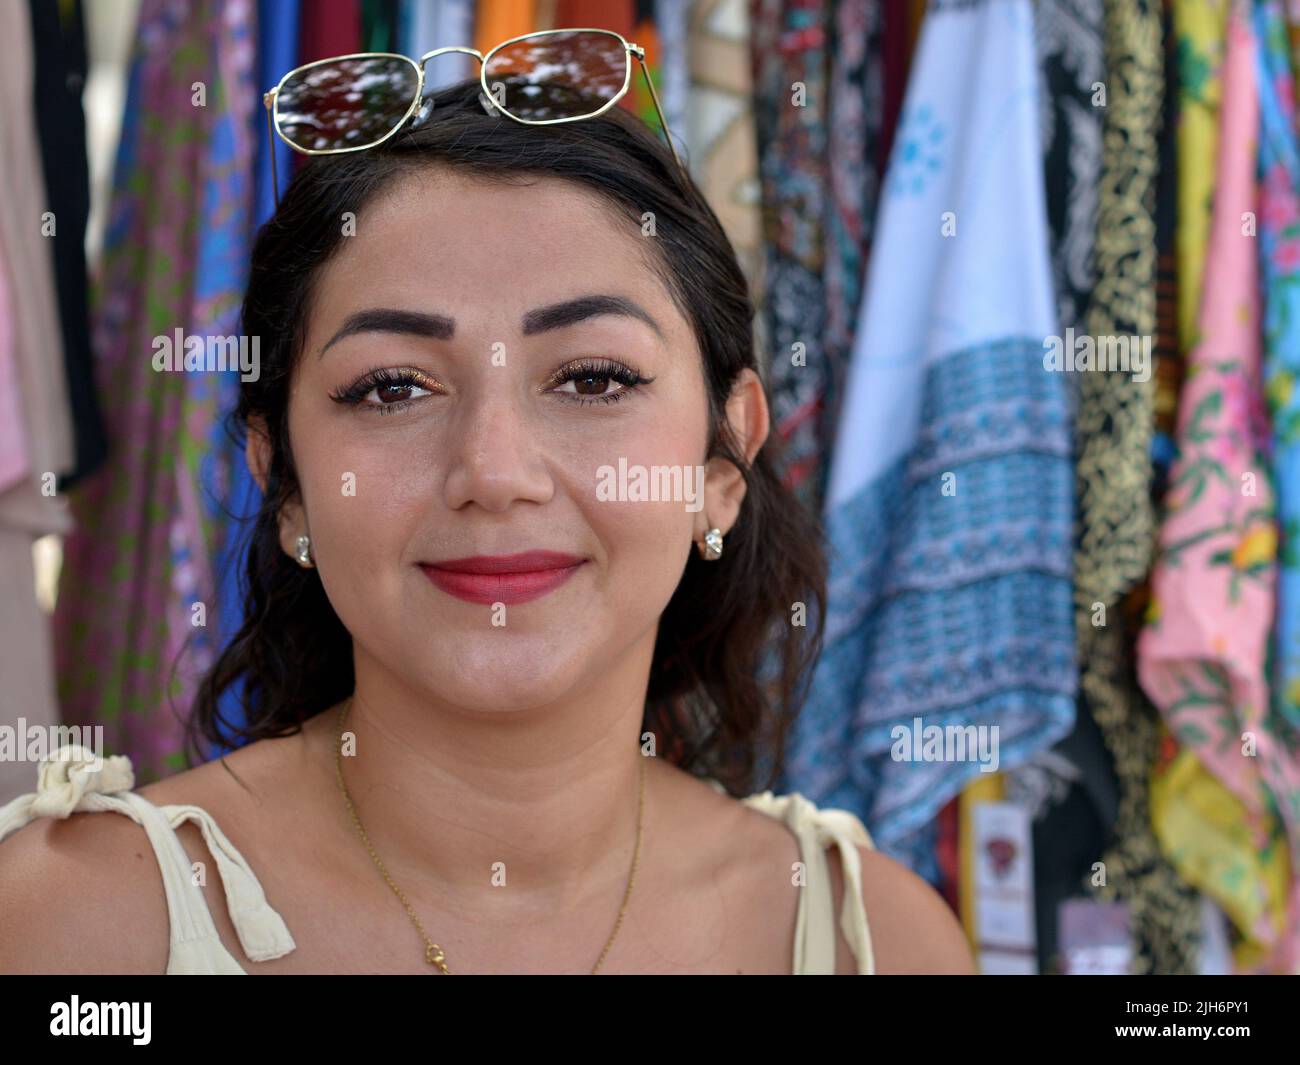 Attractive beautiful young Hispanic Latina Mexican brunette woman with eye makeup, red lipstick and modern eye brows wears her sunglasses on forehead. Stock Photo